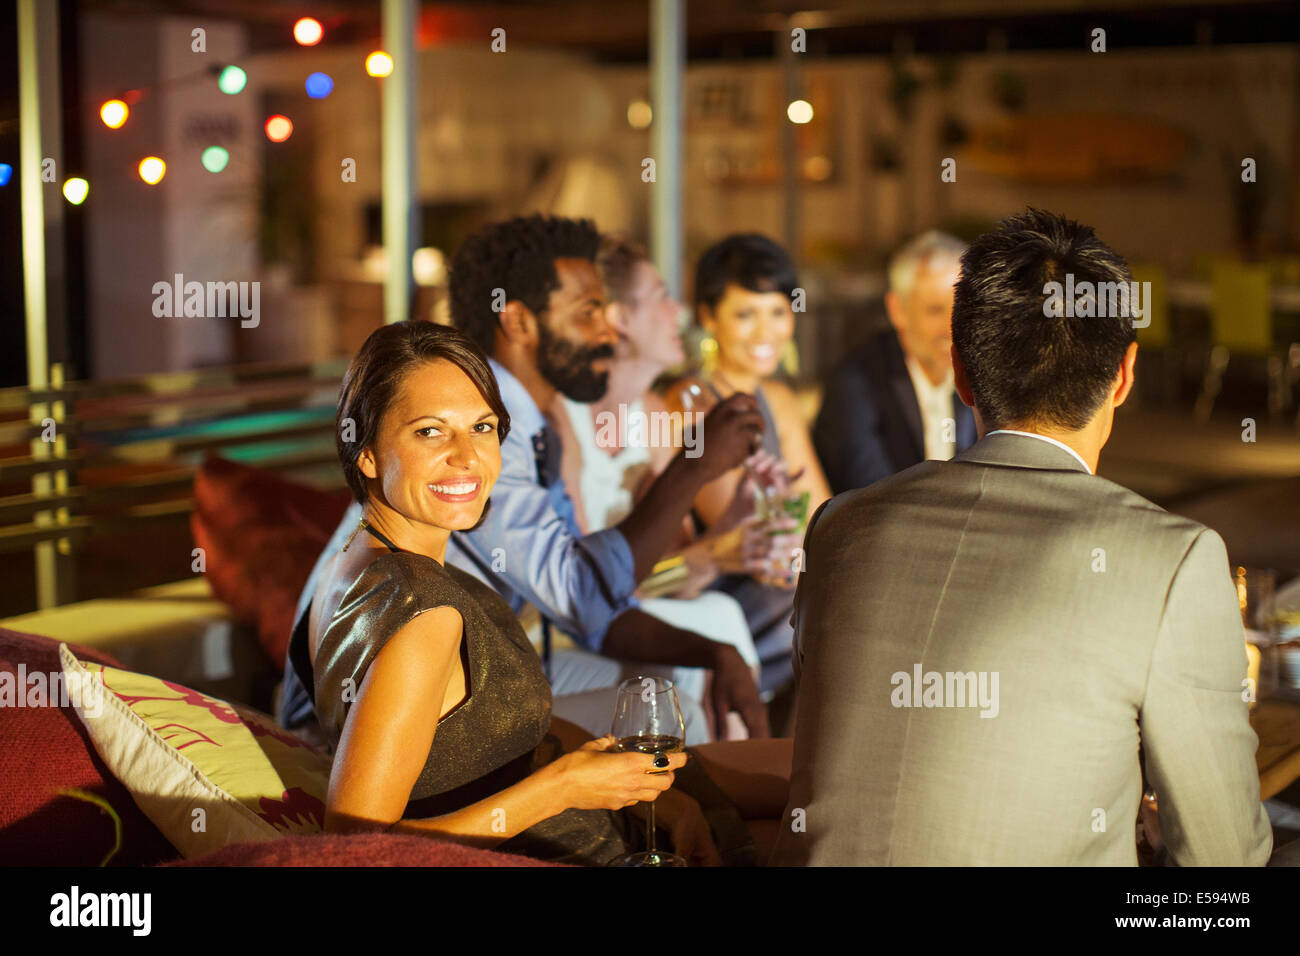 Friends relaxing together at party Stock Photo